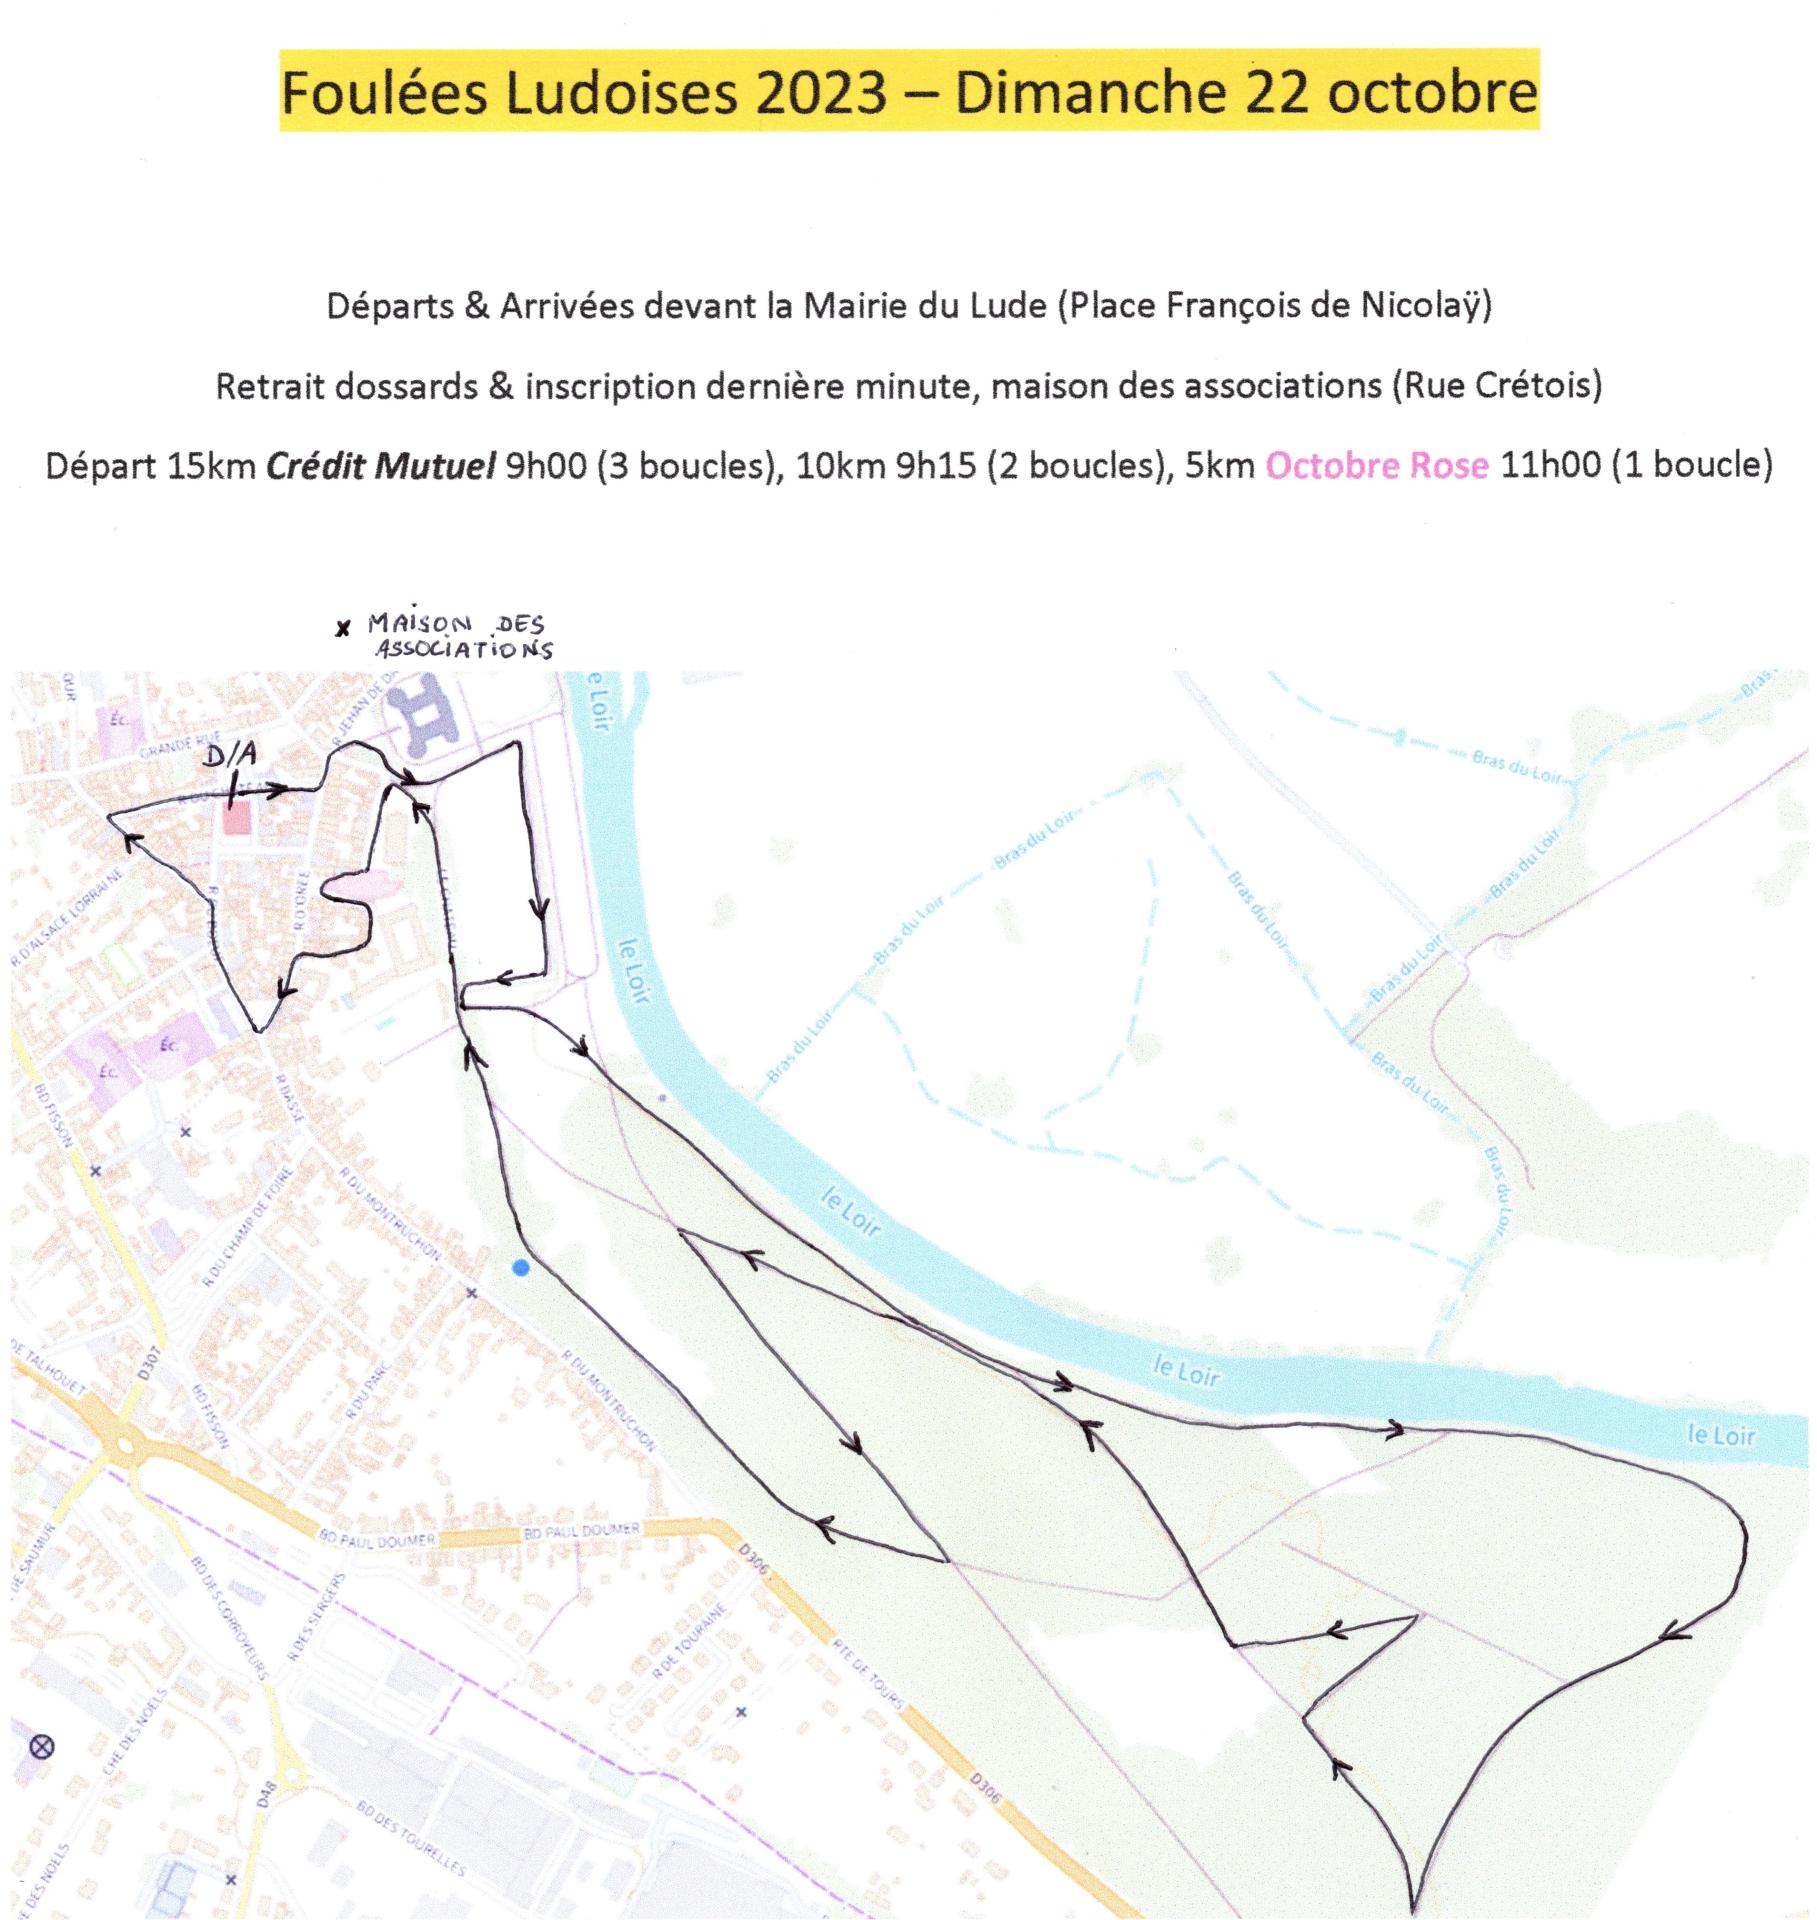 Parcours foulees ludoises 2023